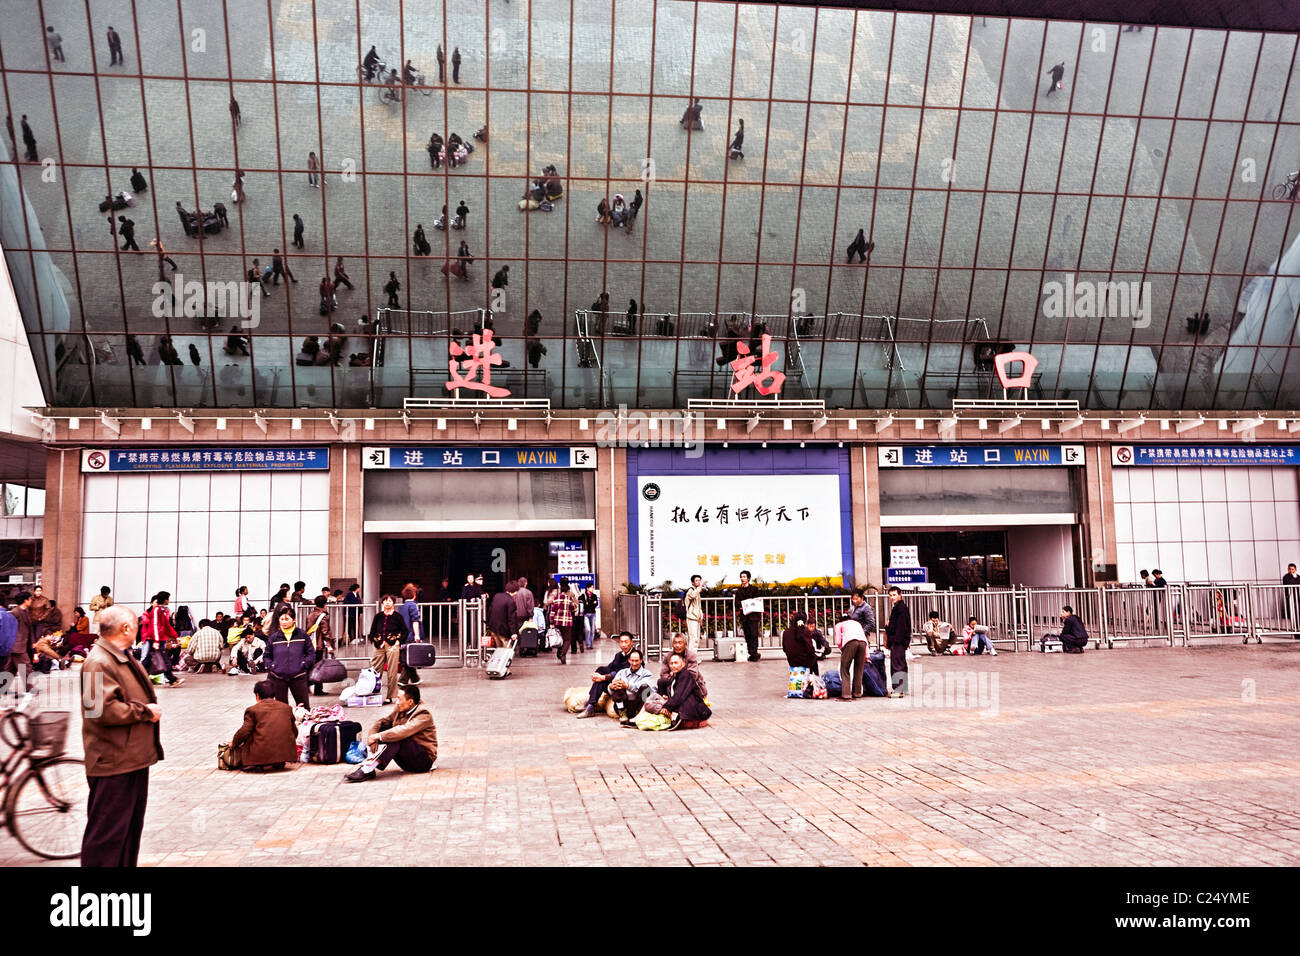 CHINA, WUHAN: Hankou Railway Station in Wuhan with plaza and people reflected in the mirrors on the front of the station. Stock Photo